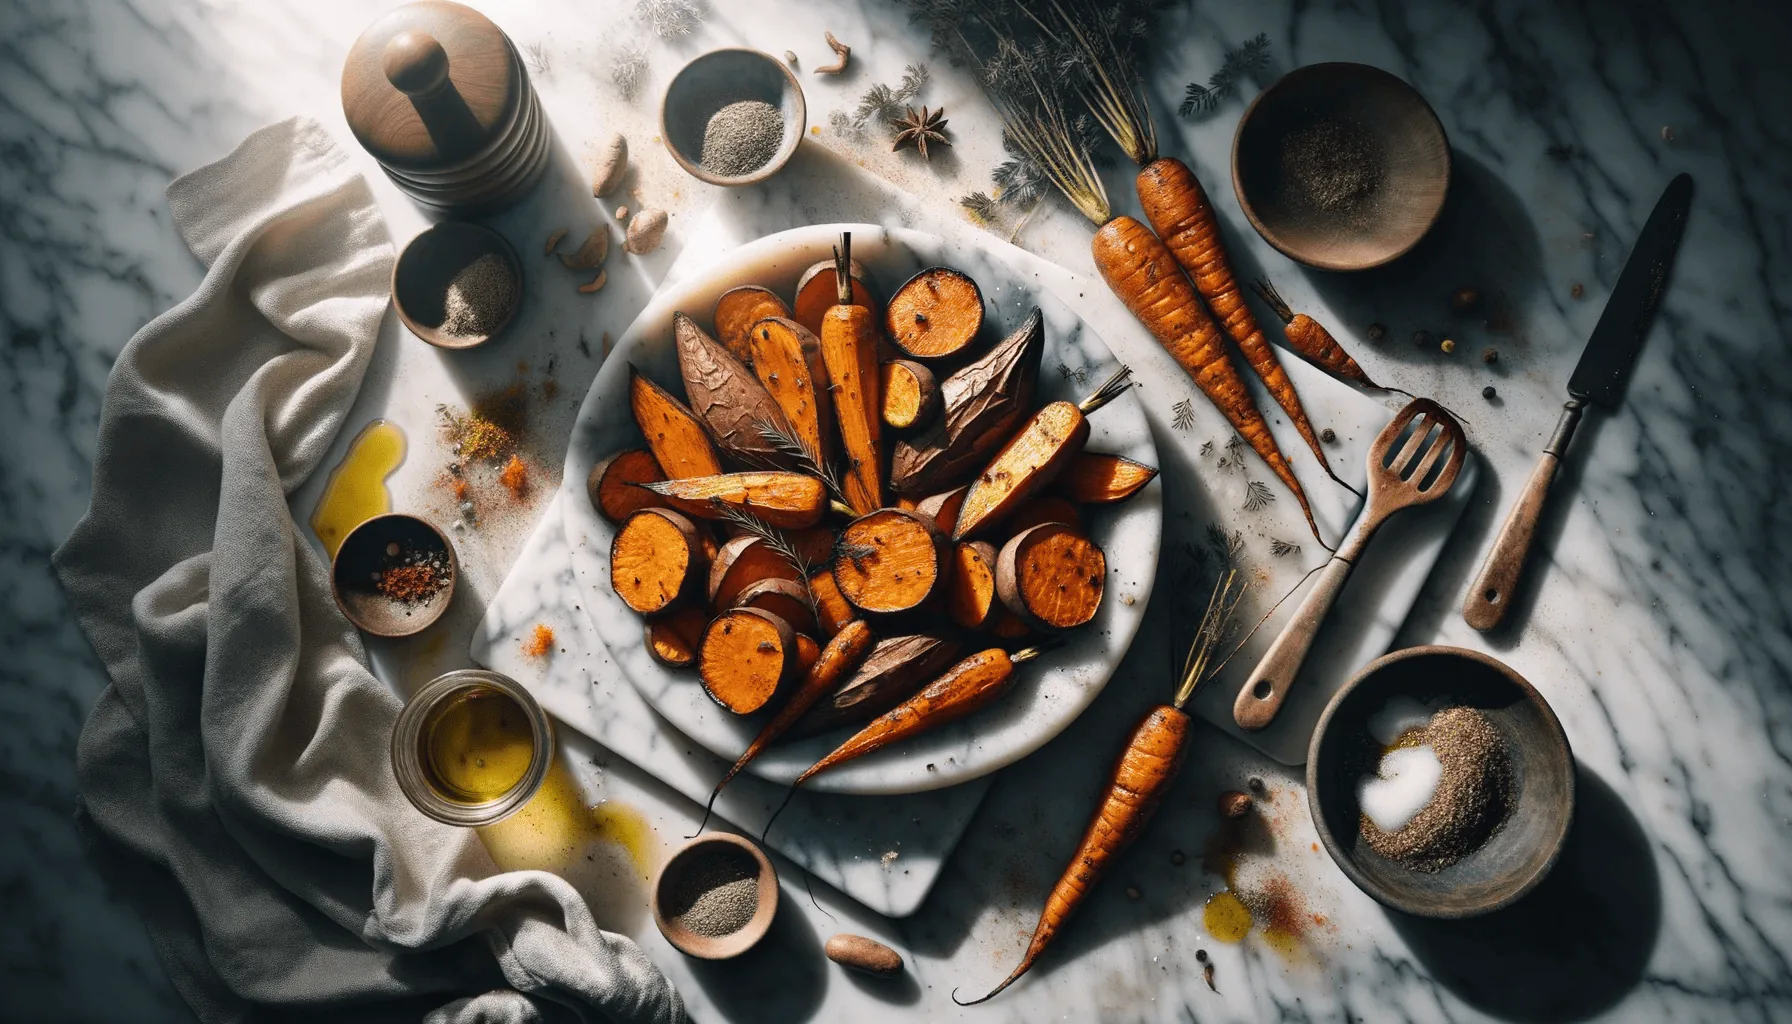 Roasted sweet potatoes and carrots, ready to serve